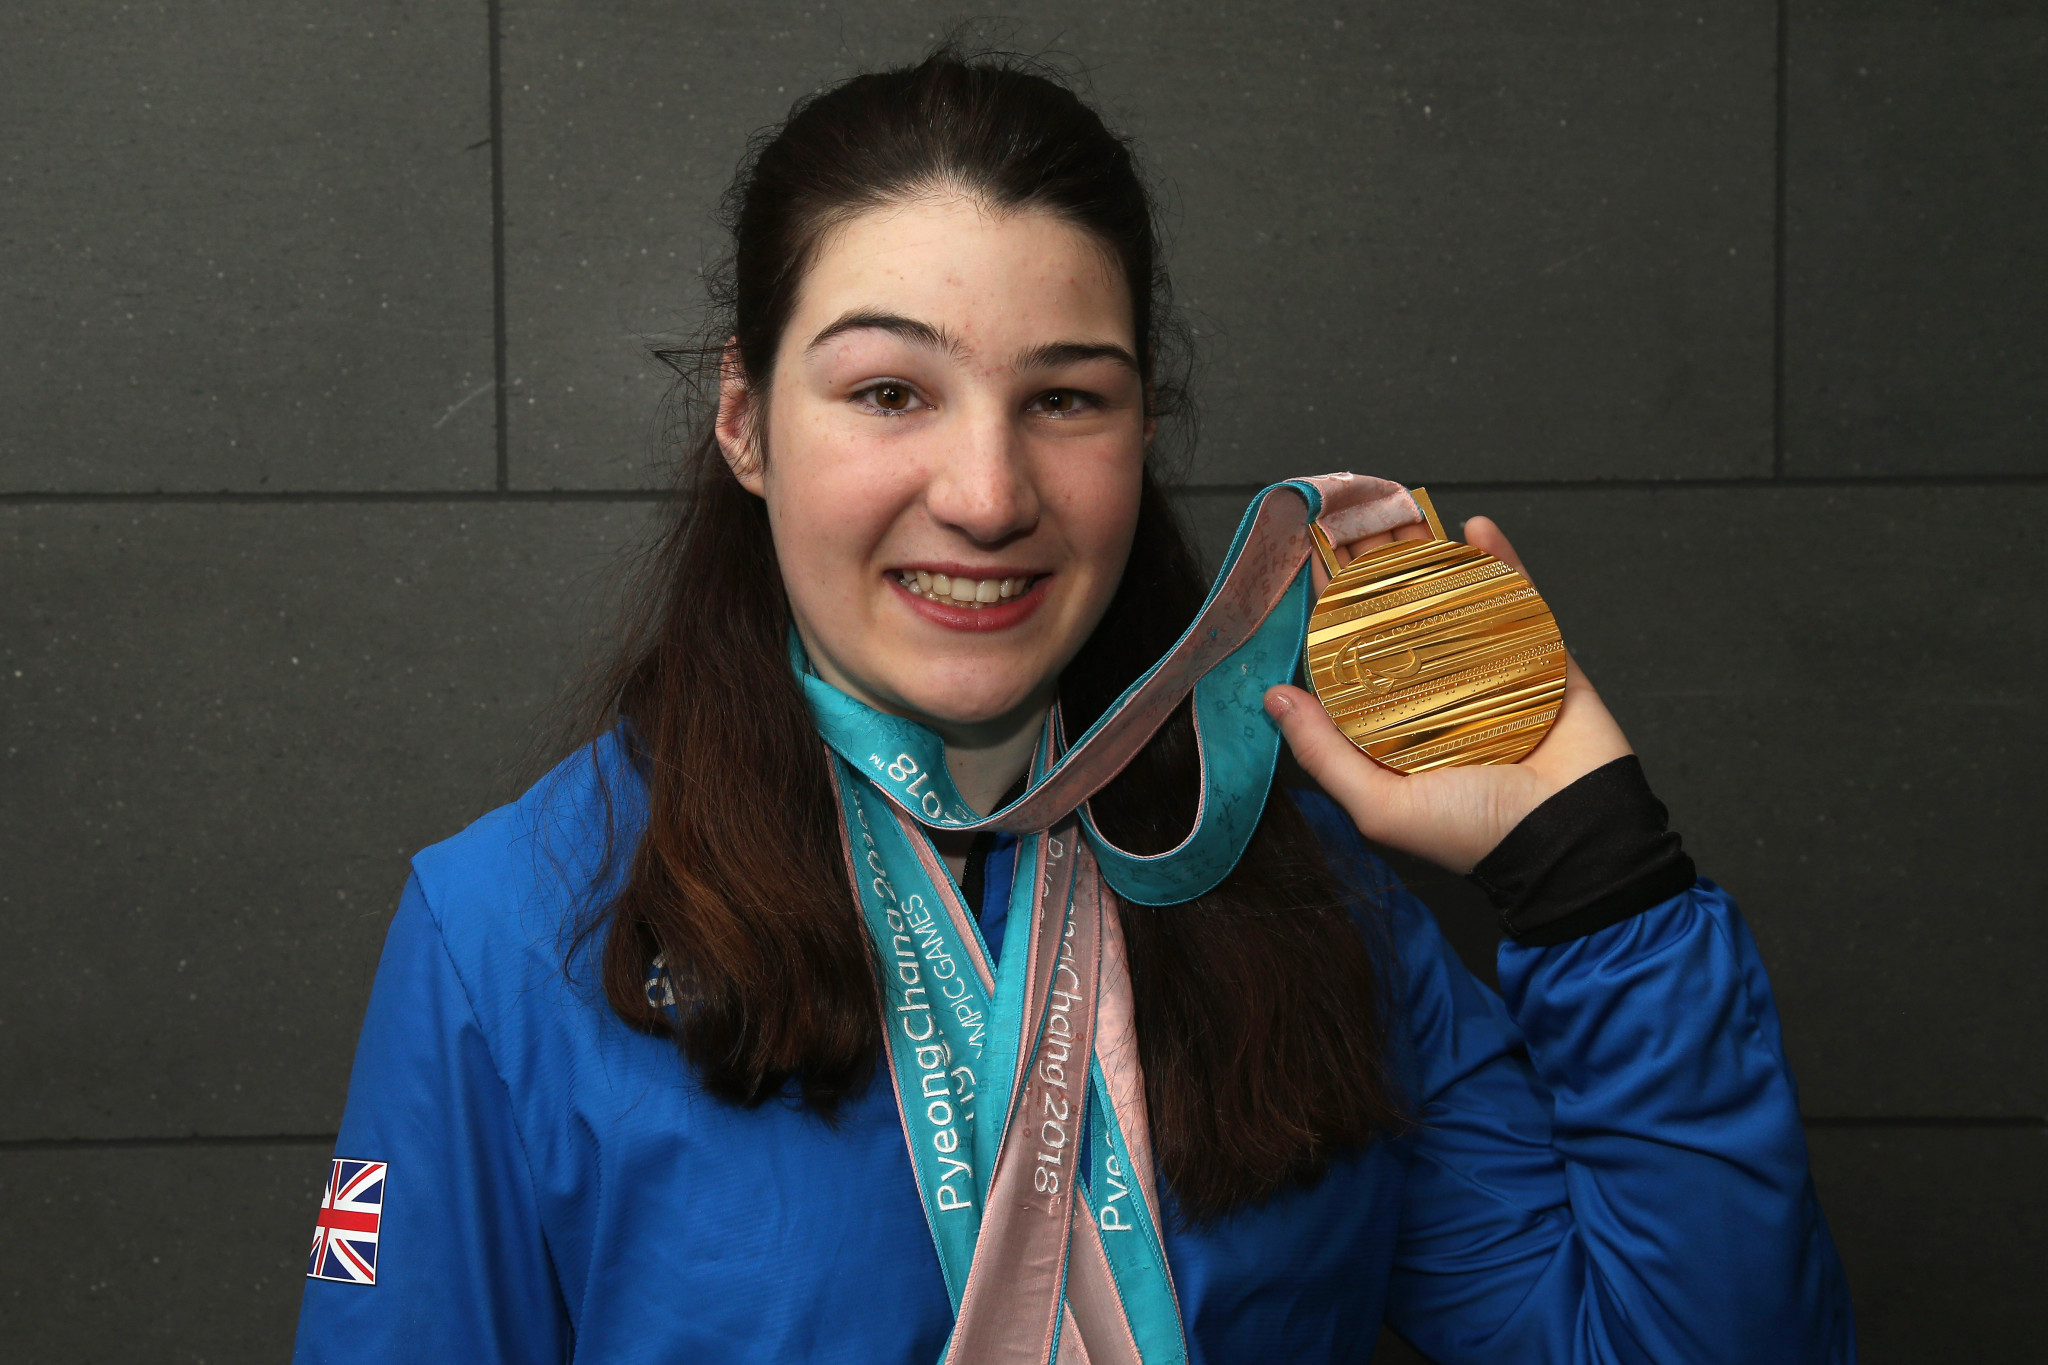 Paralympic champion Menna Fitzpatrick is one of several athletes promoting the event ©Getty Images